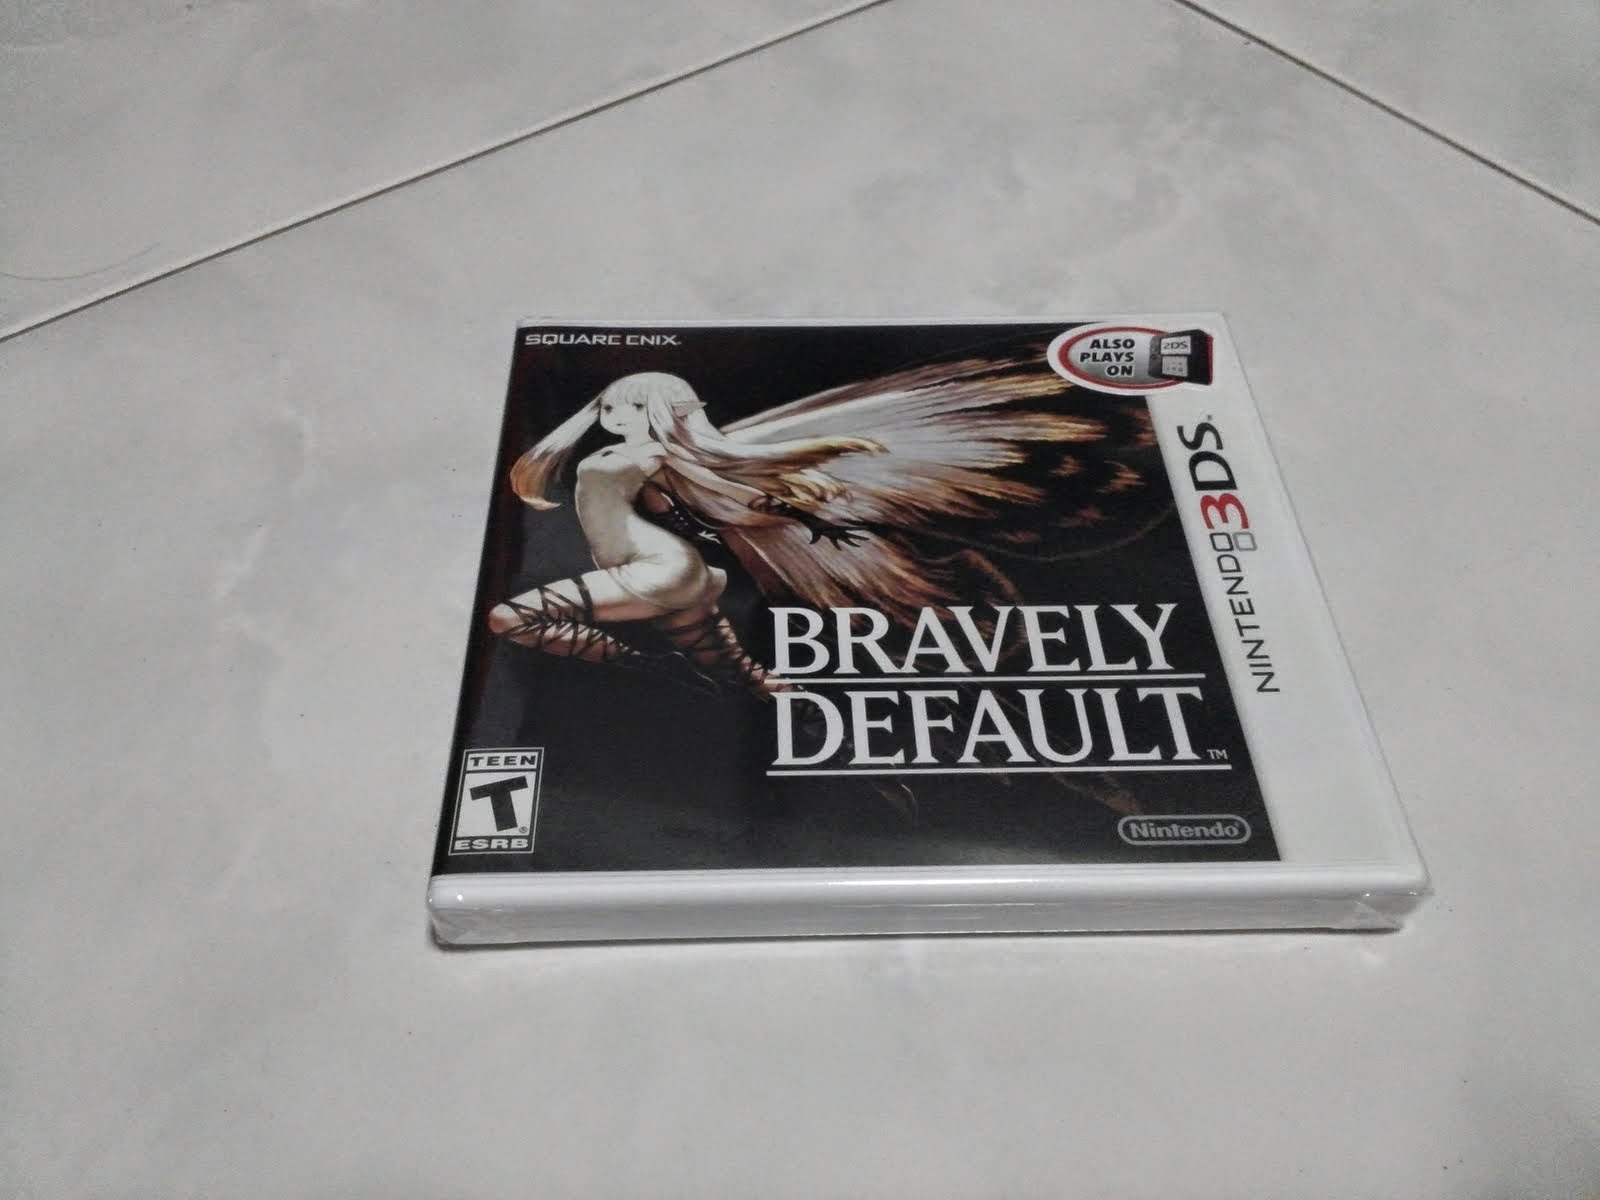 Hoot From Amk War Games At Jubilee For $52 - Bravely Default 3ds Box , HD Wallpaper & Backgrounds